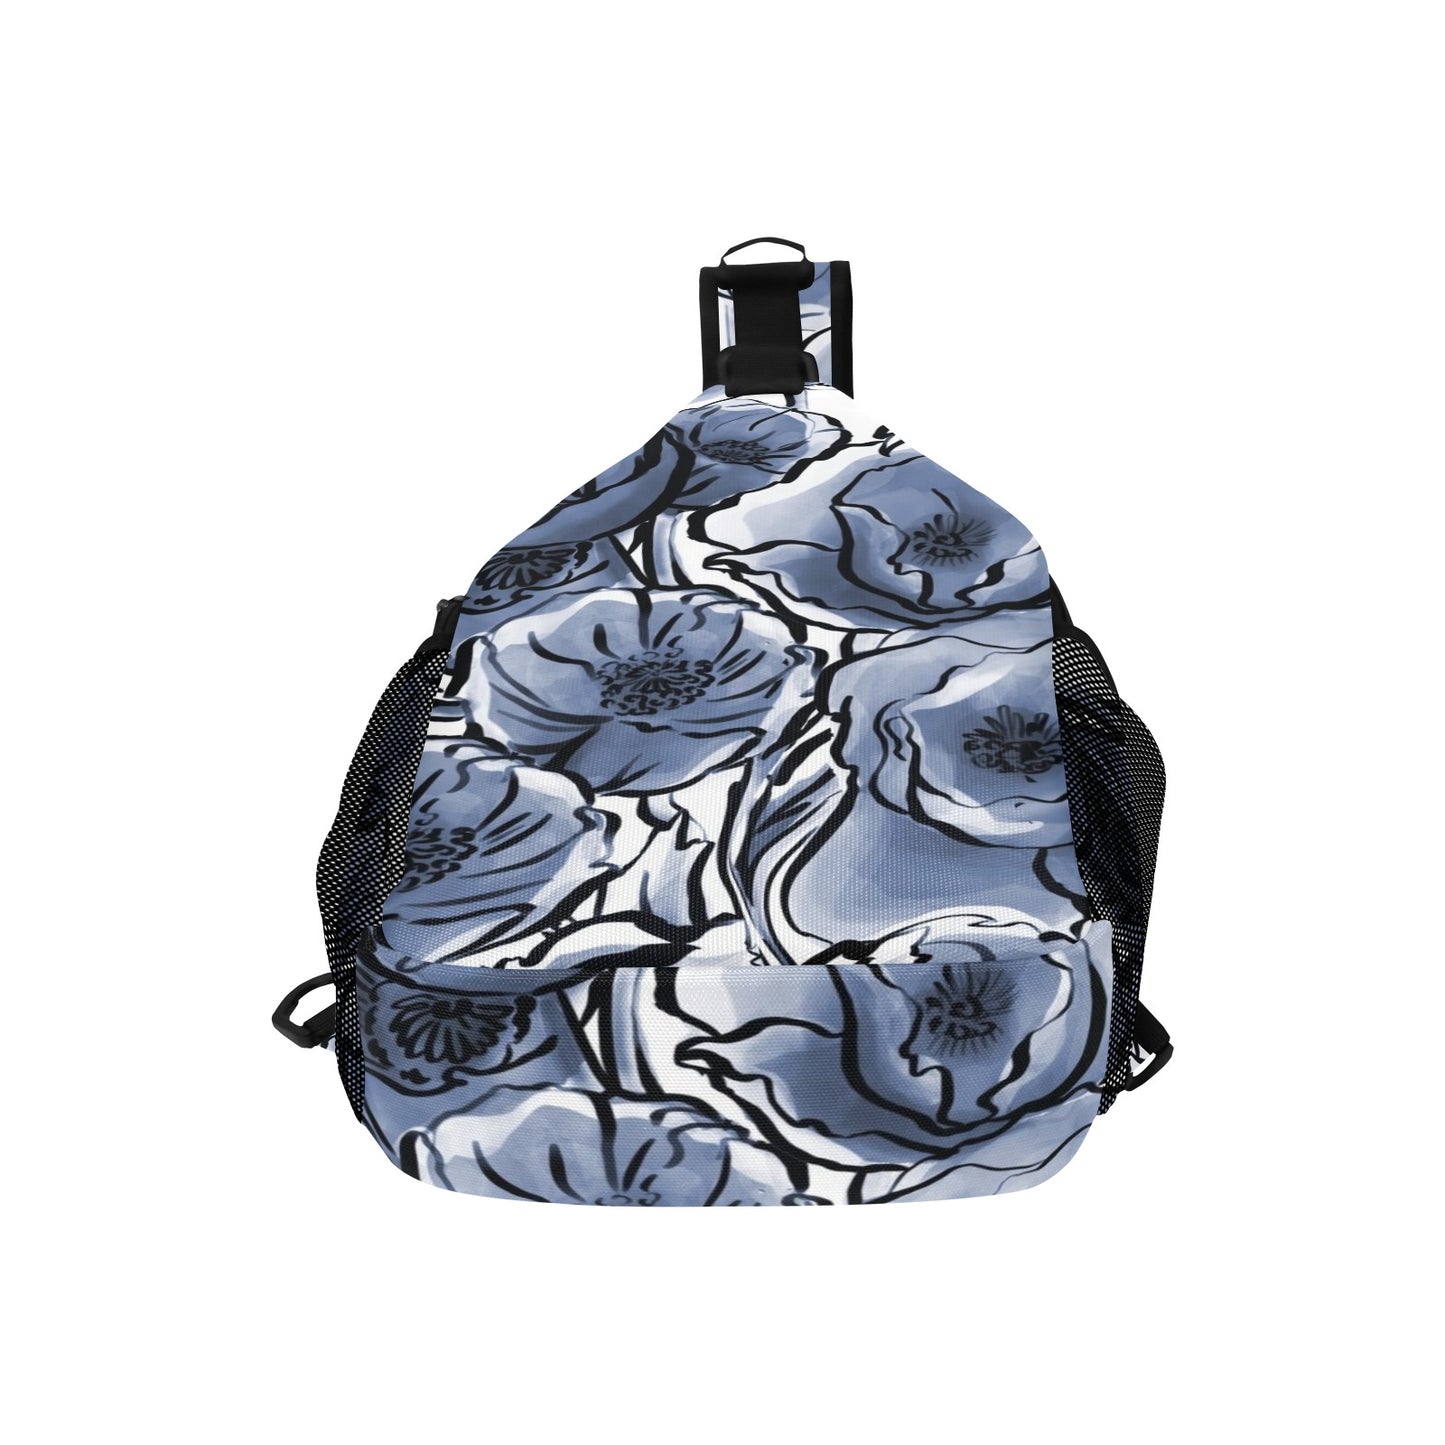 Blue And White Floral - Cross-Body Chest Bag Cross-Body Chest Bag